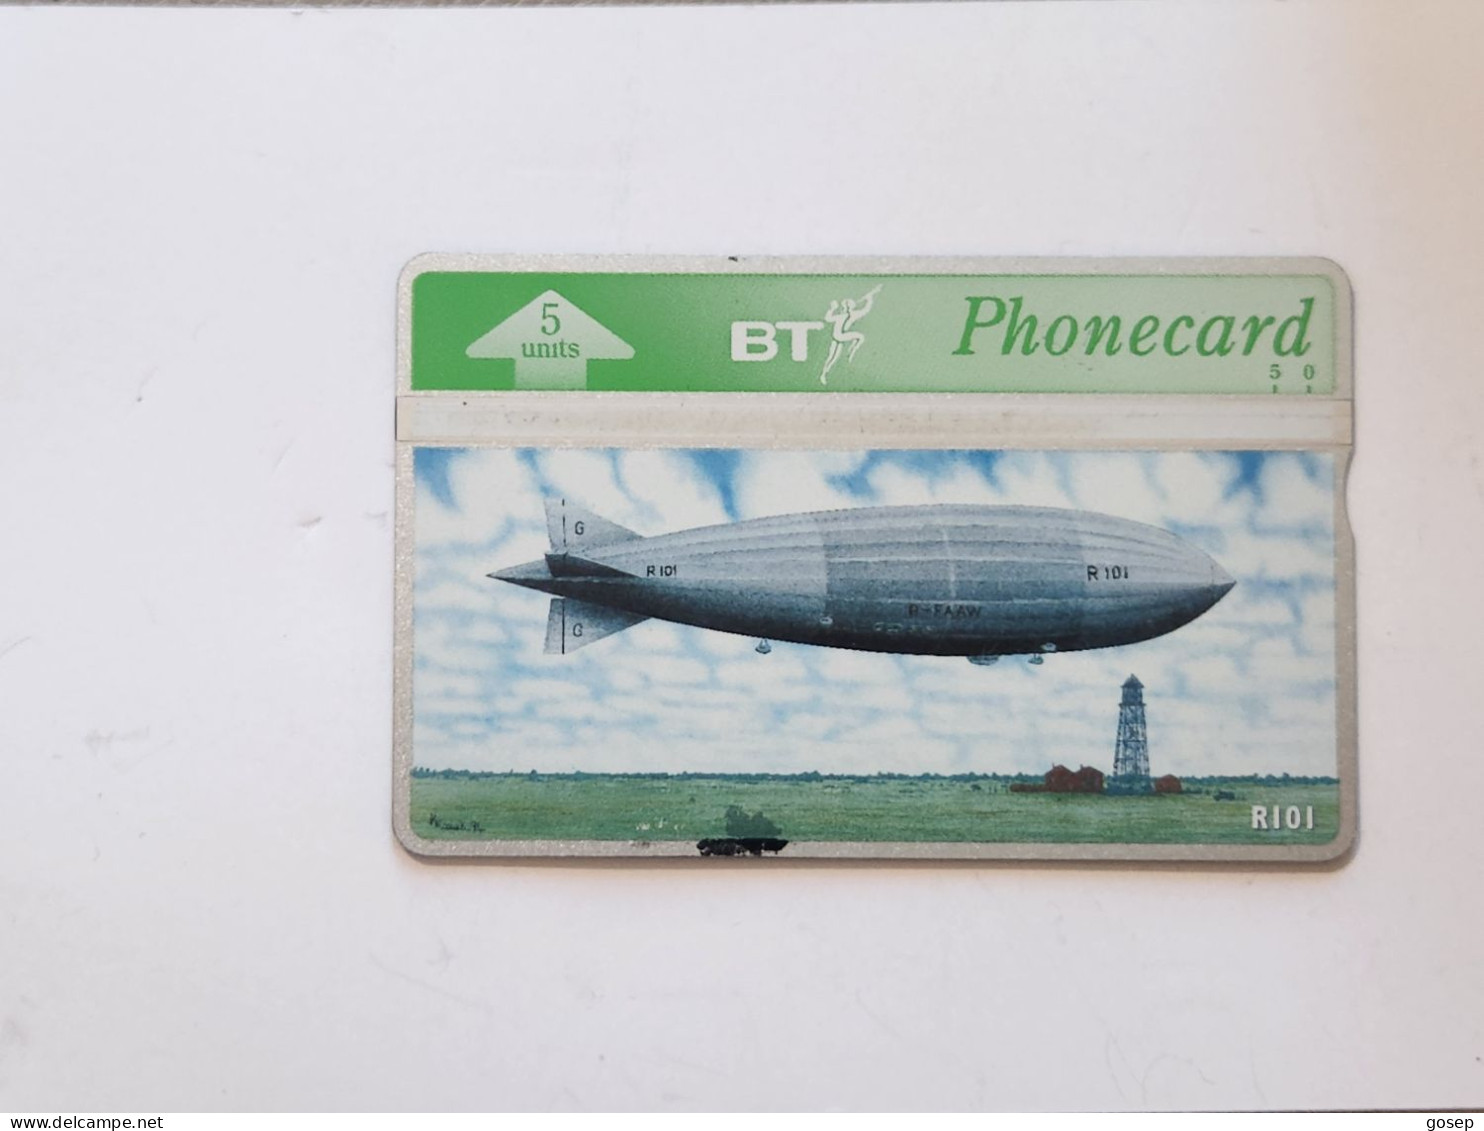 United Kingdom-(BTG-335)-World Disaters-(3)-R101-(310)(5units)(407A30976)(tirage-1.000)-price Cataloge-5.00£-mint - BT General Issues